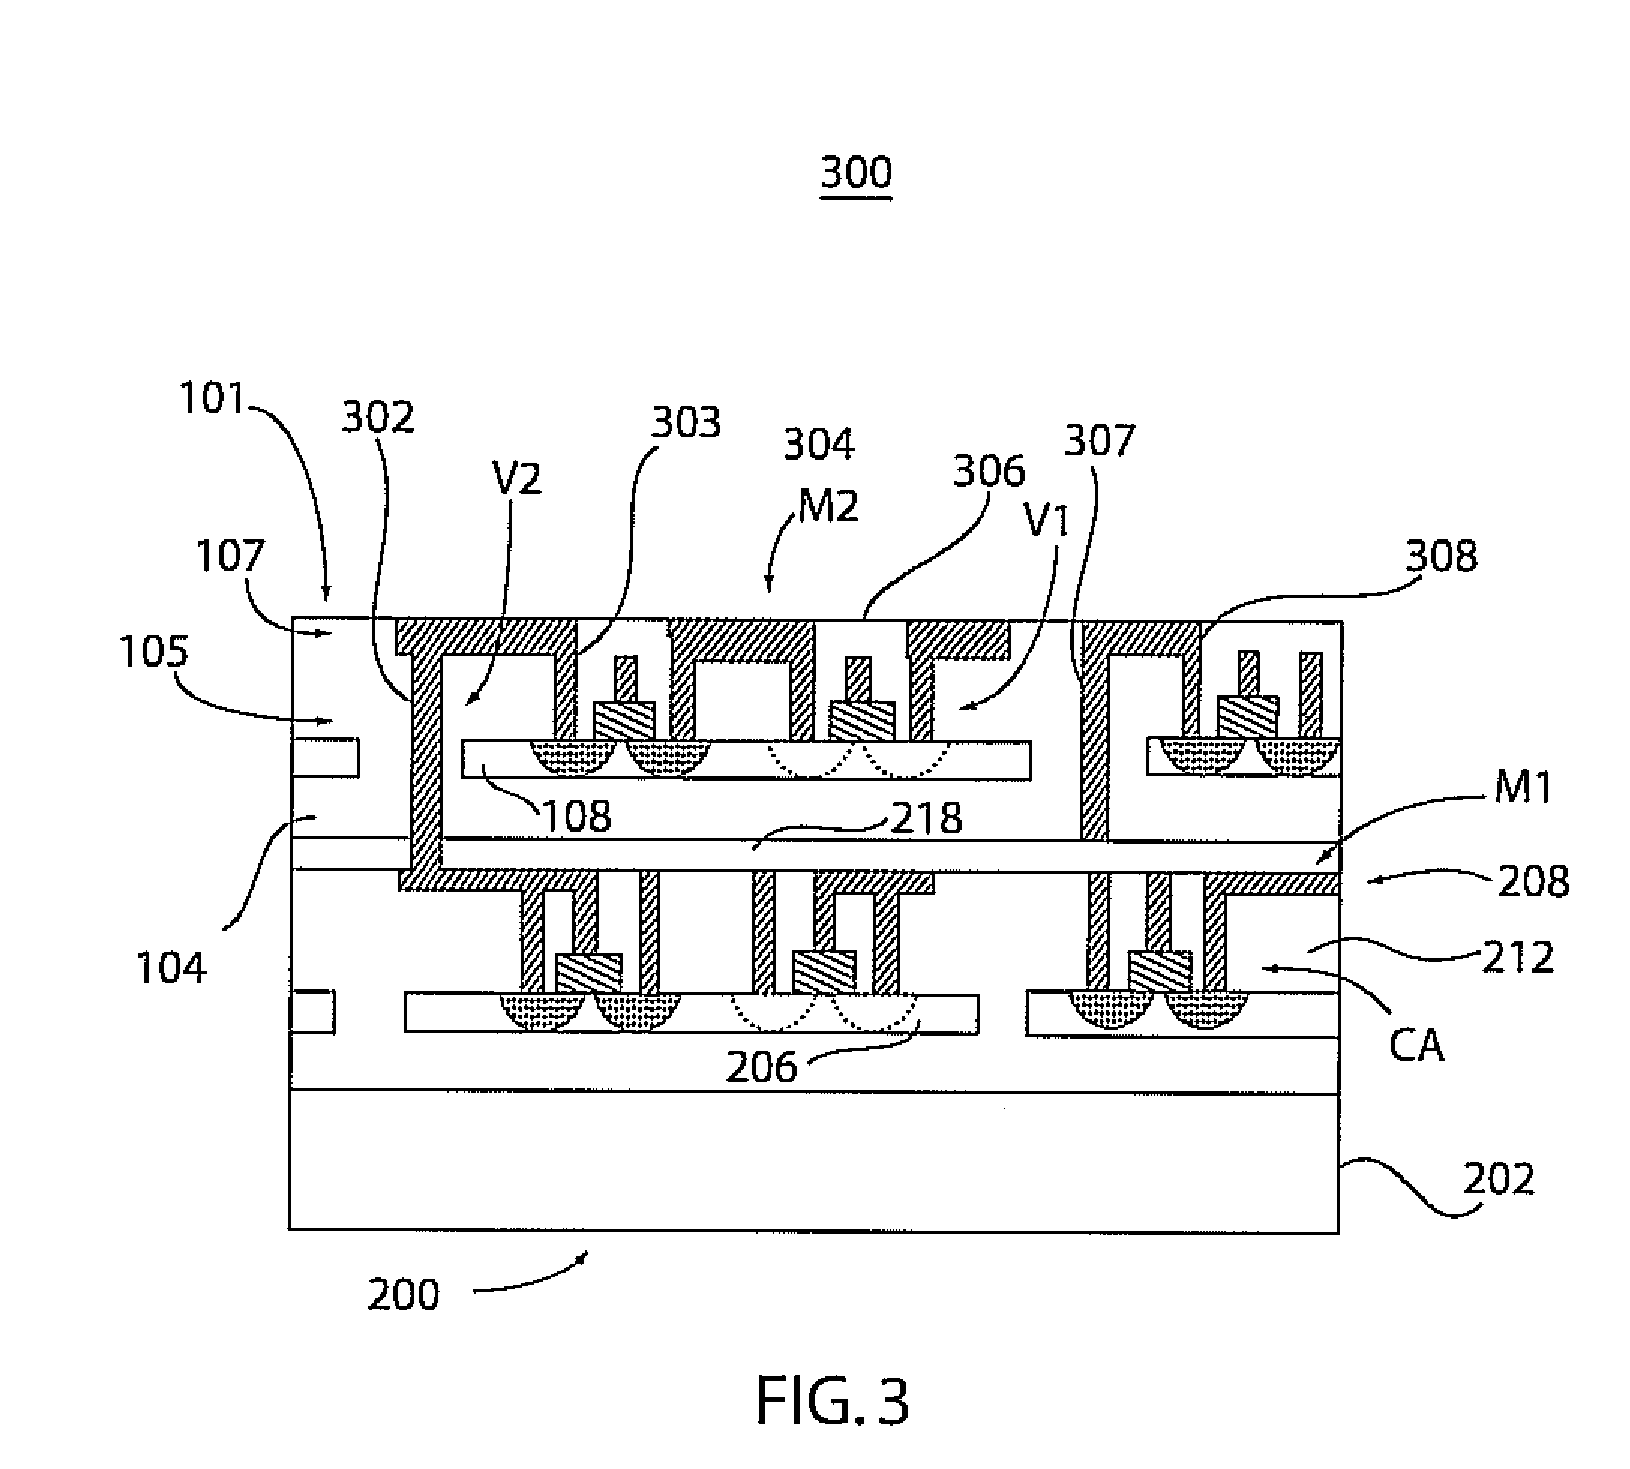 Three-dimensional architecture for self-checking and self-repairing integrated circuits